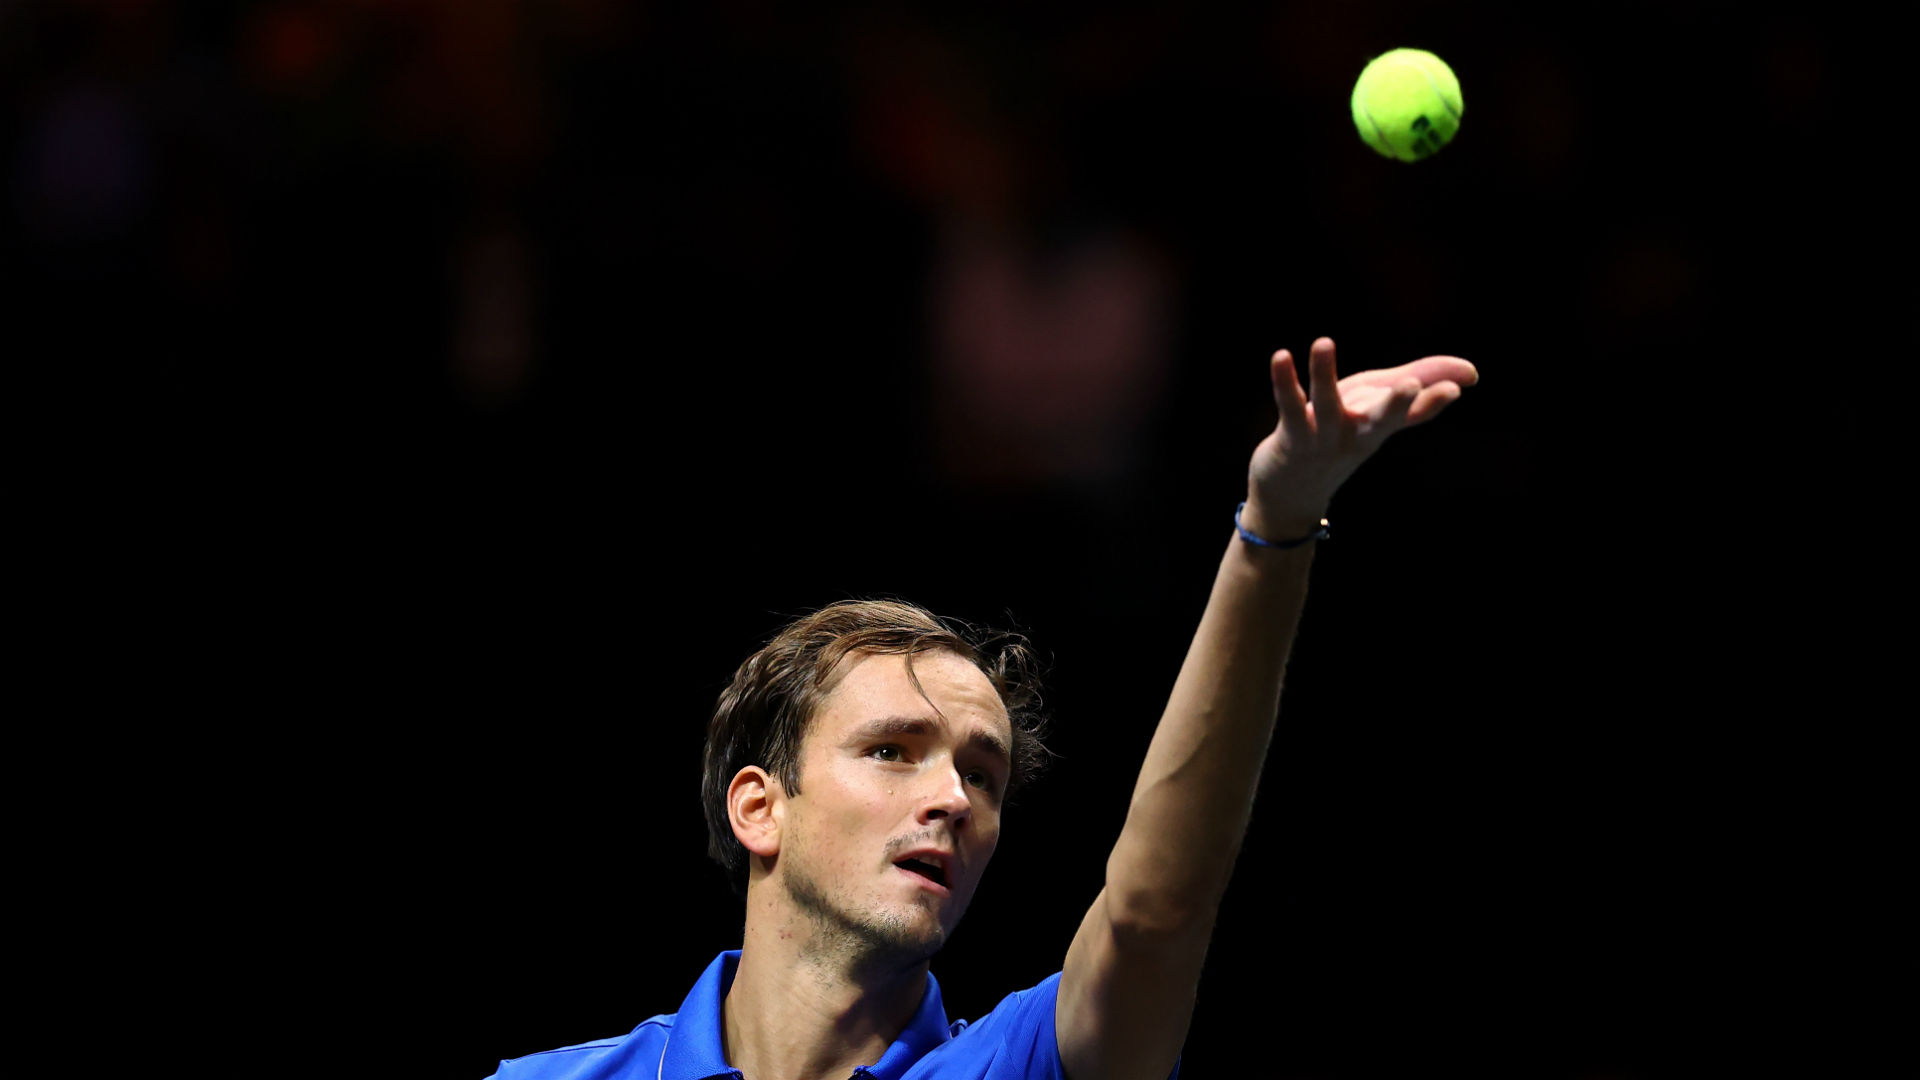 Gilles Simon claimed his 29th career win at the Open 13 Marseille, stunning Daniil Medvedev in the process.